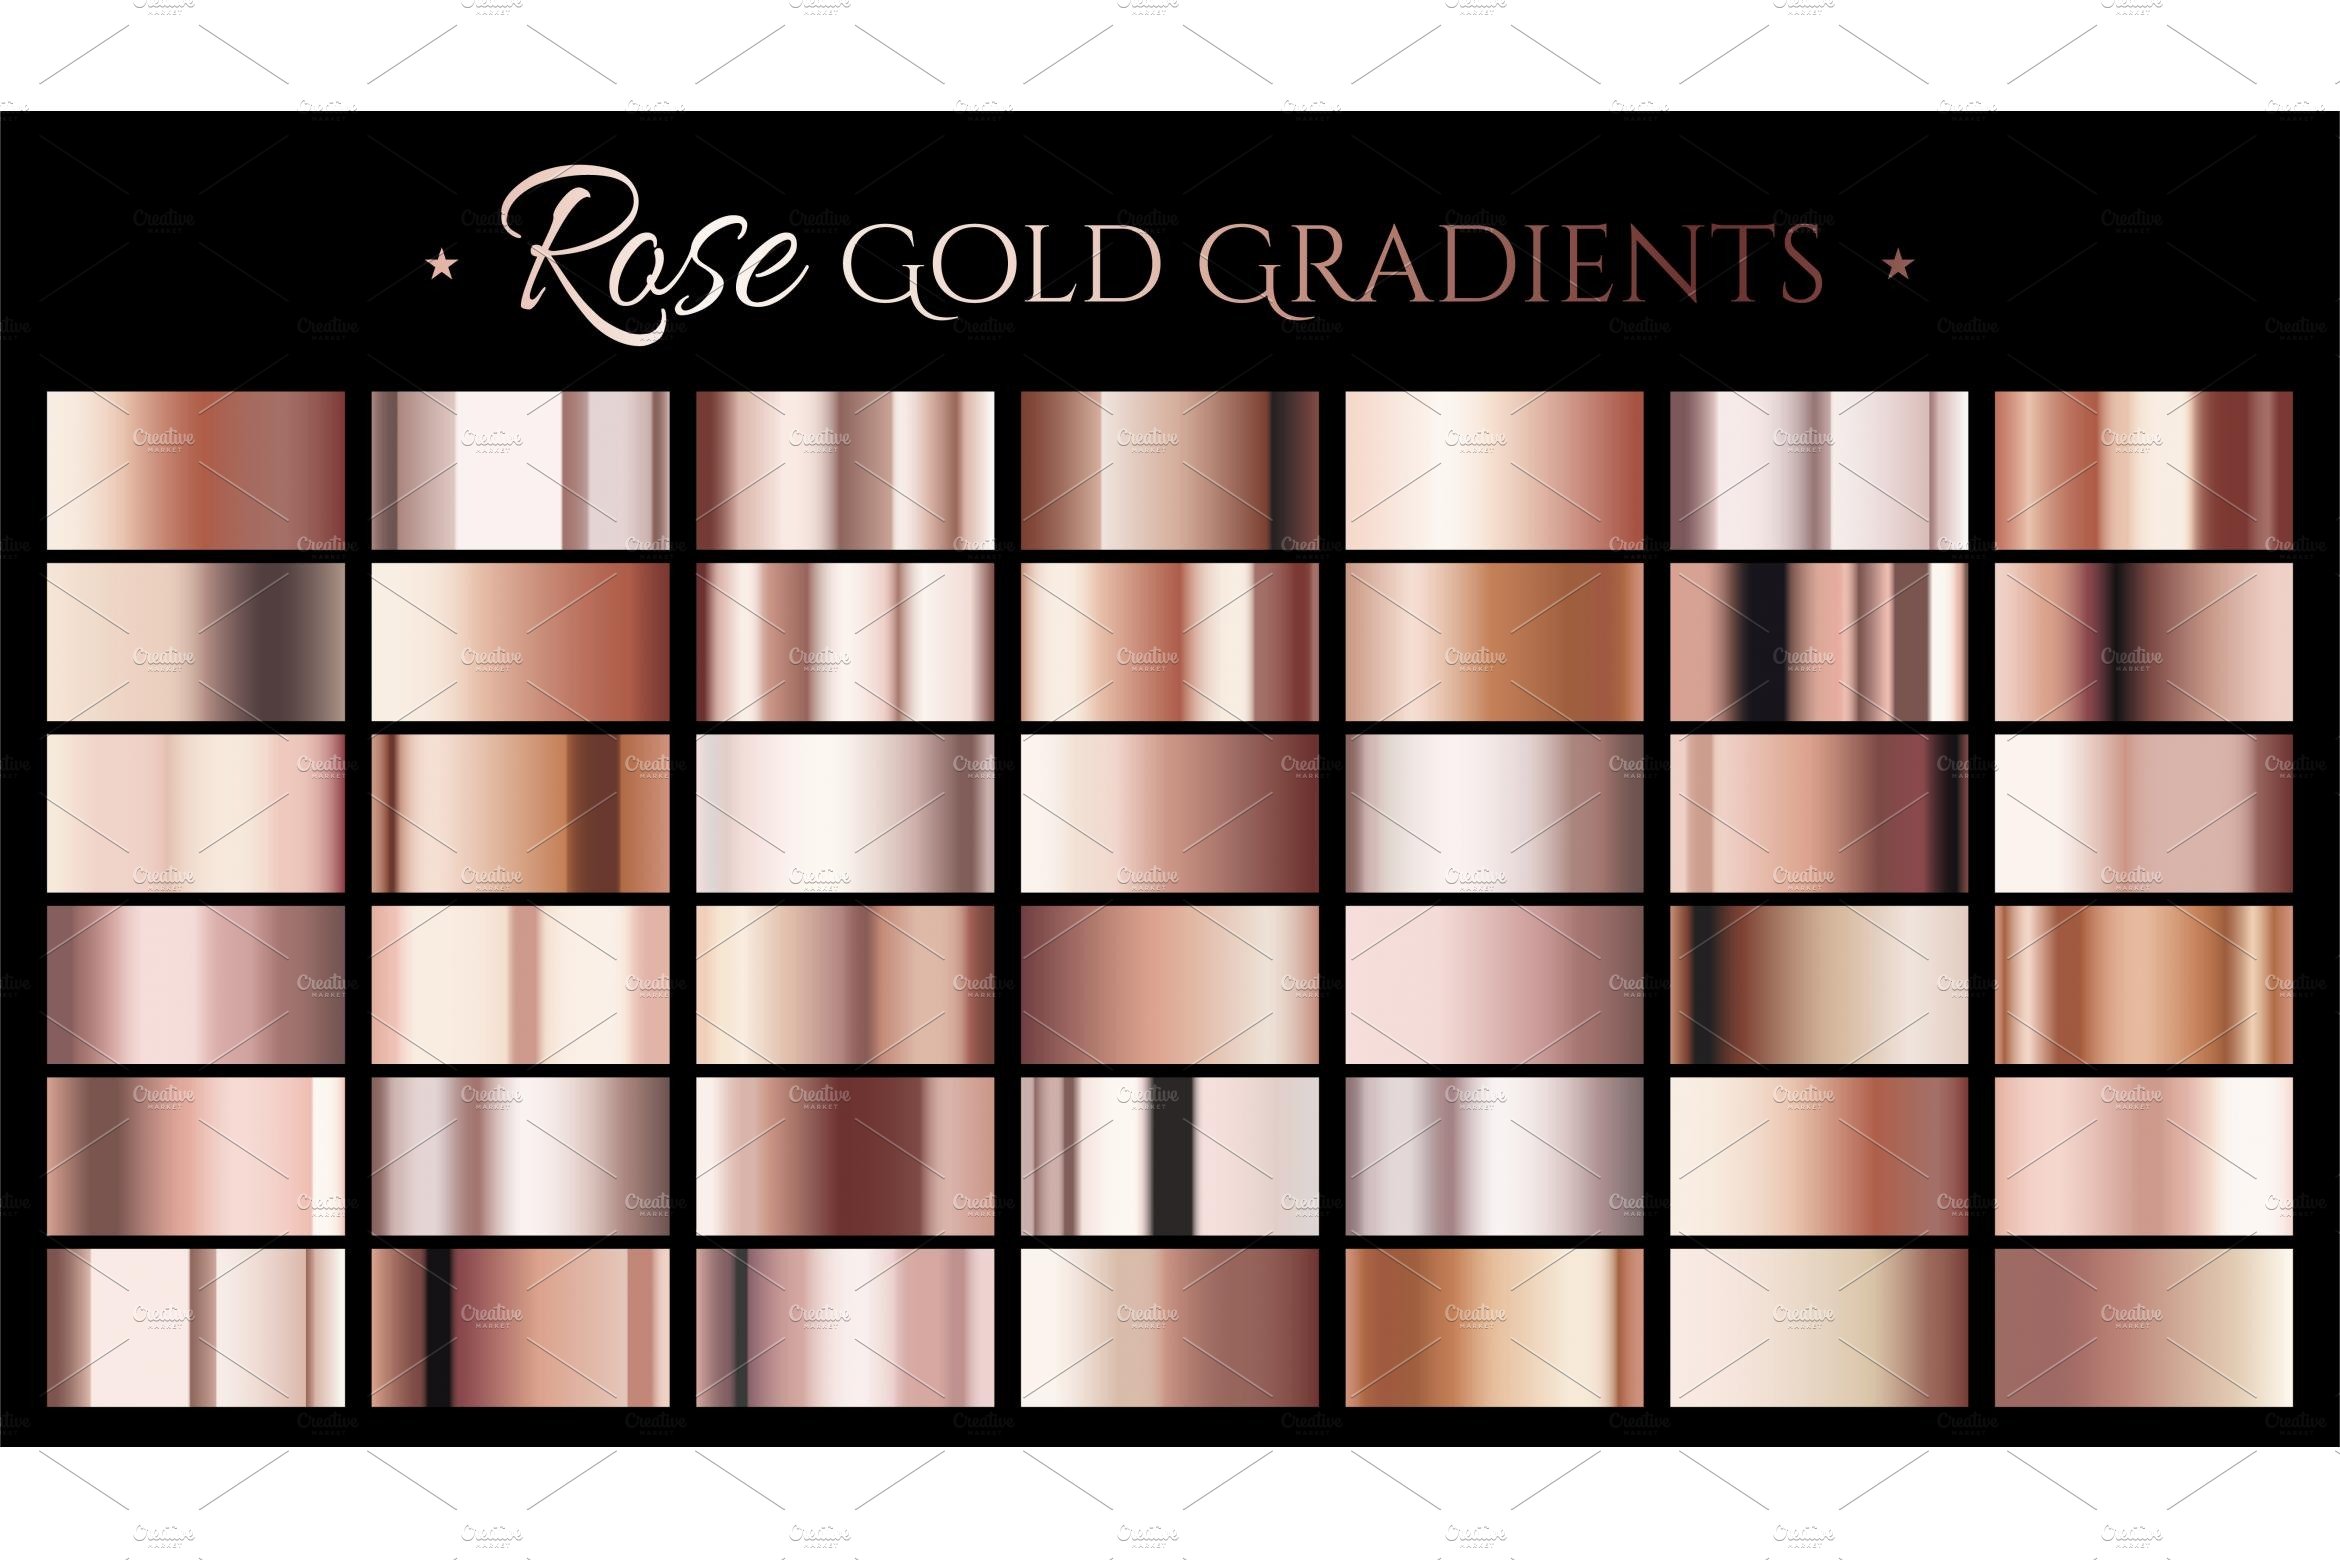 Rose gold color gradient cover image.